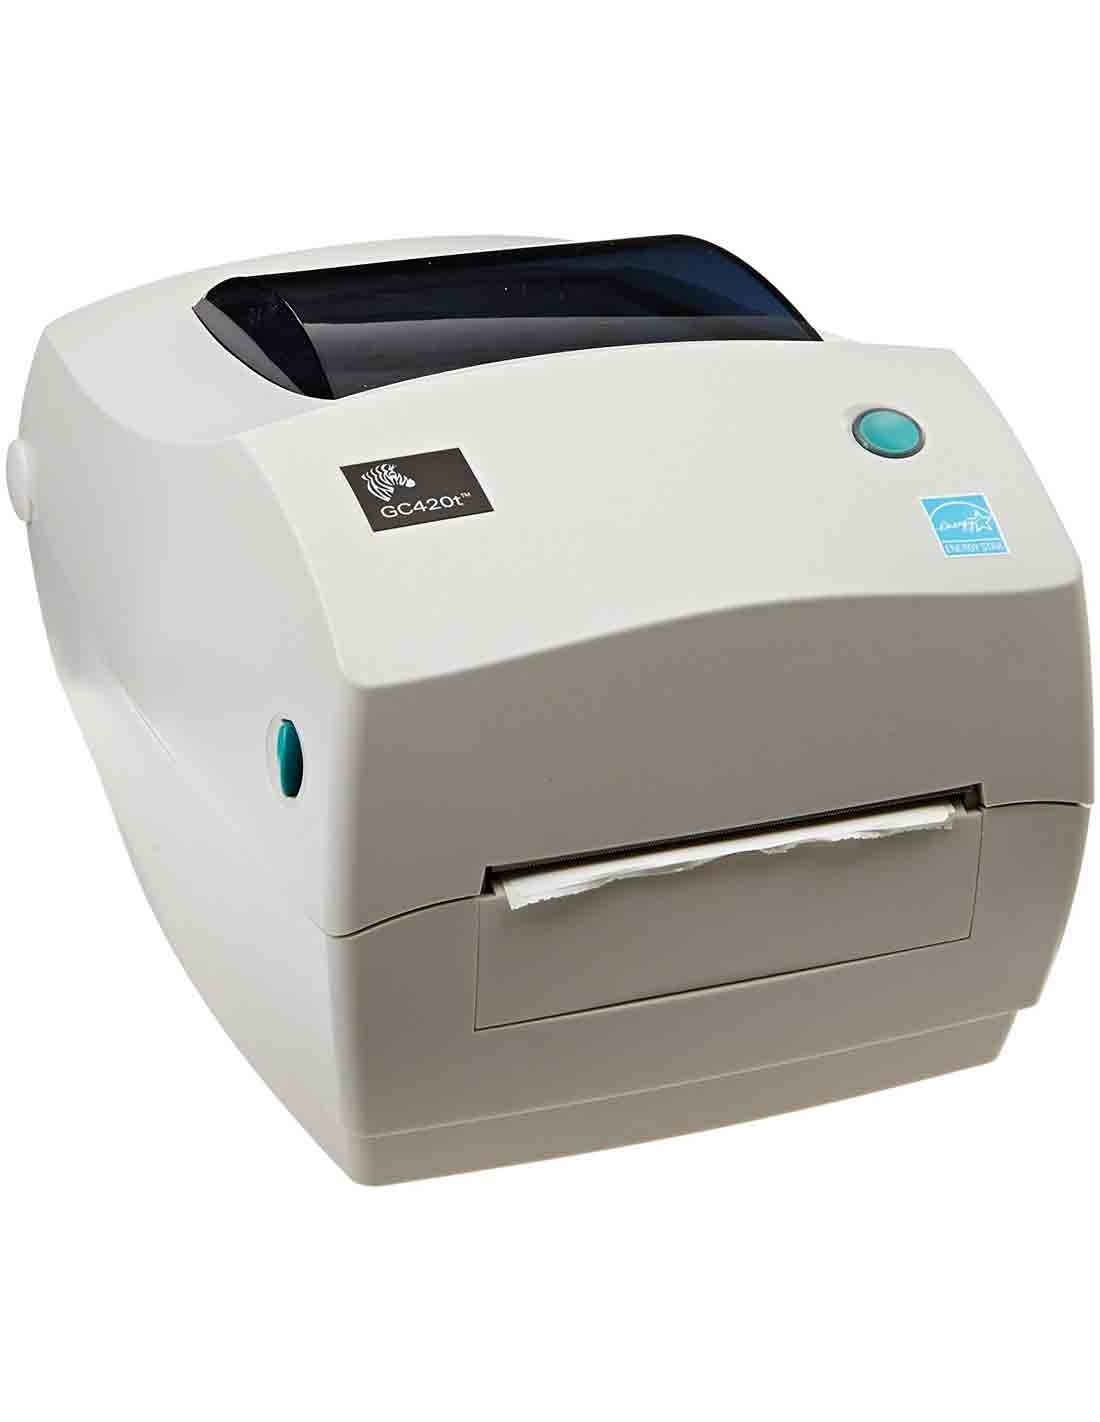 Zebra GC420T Desktop Barcode Printer buy online at a cheap price in Dubai Online Store for POS System